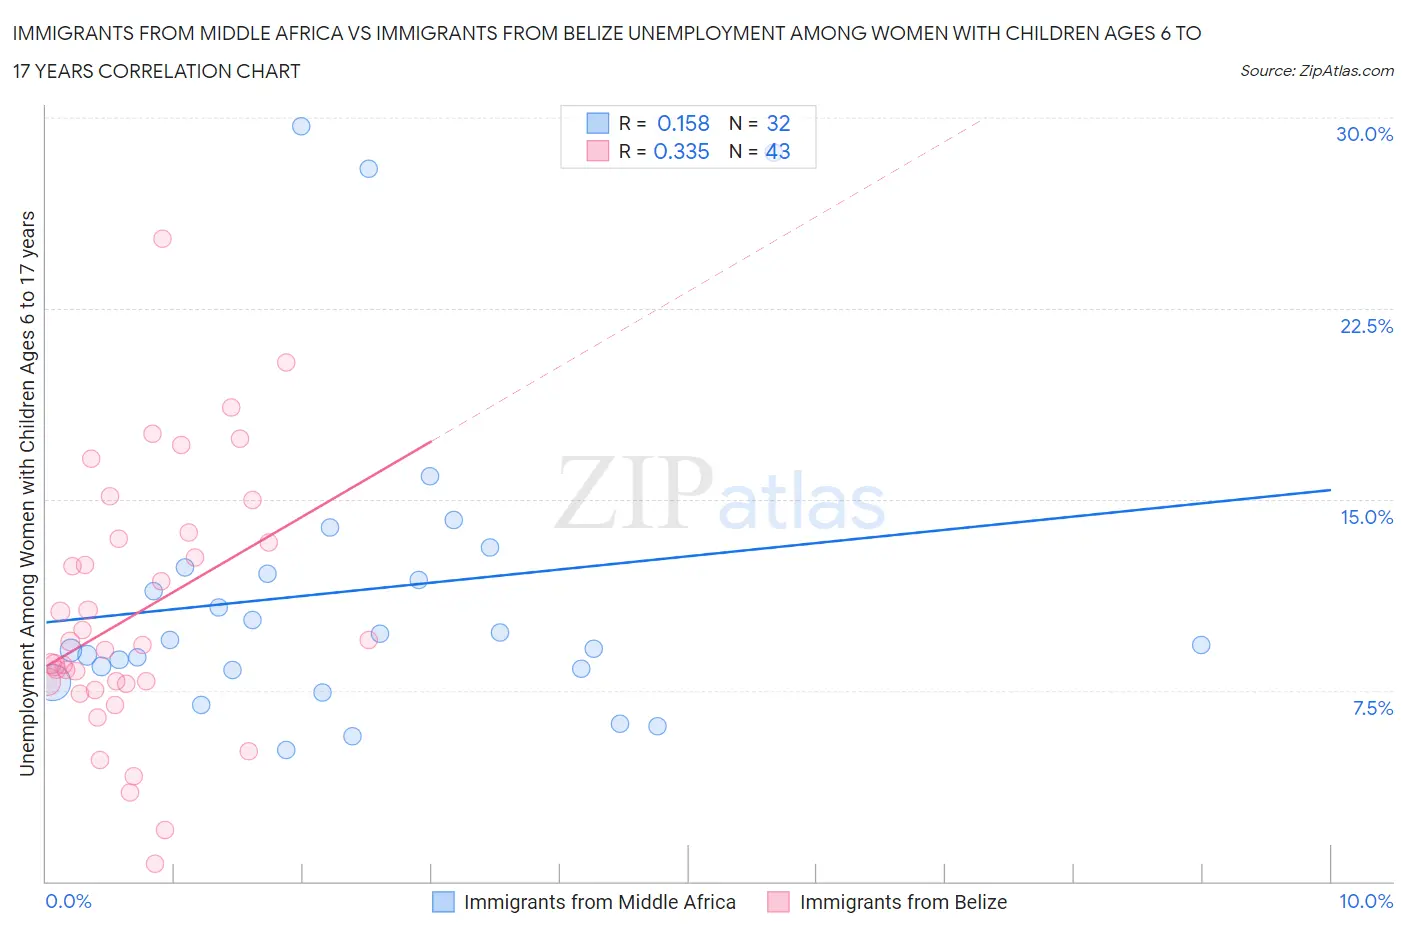 Immigrants from Middle Africa vs Immigrants from Belize Unemployment Among Women with Children Ages 6 to 17 years